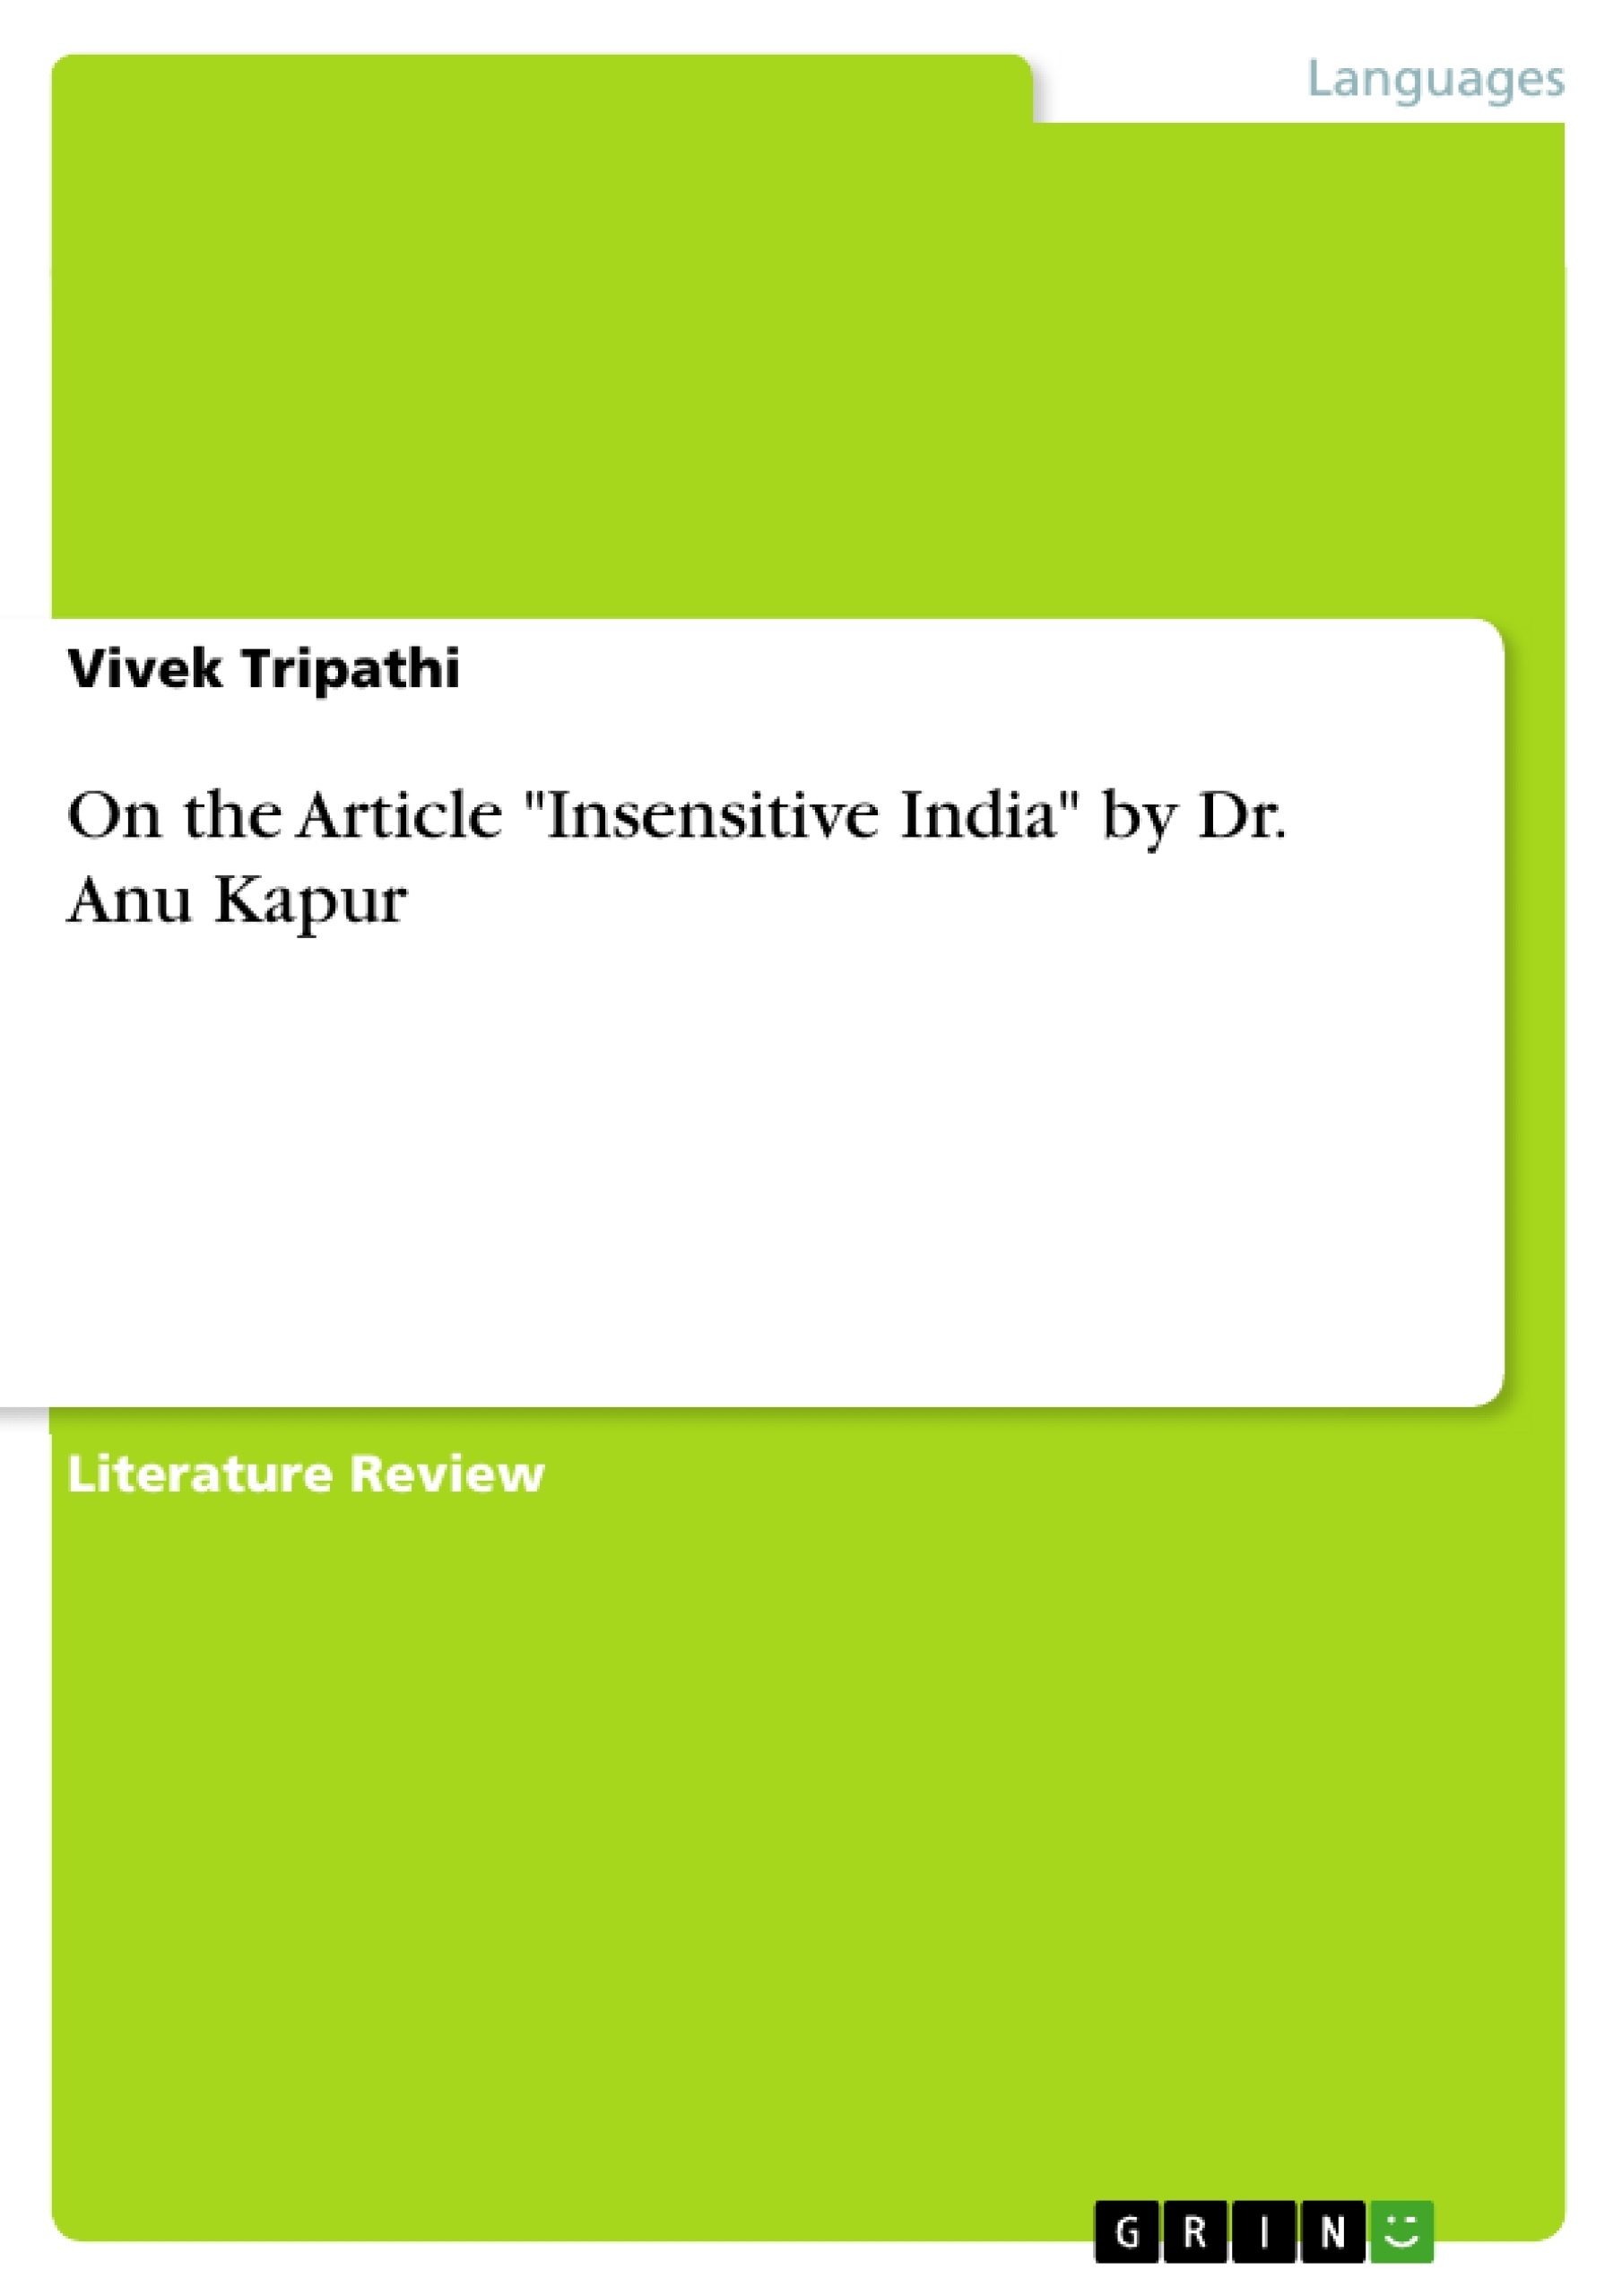 Title: On the Article "Insensitive India" by Dr. Anu Kapur